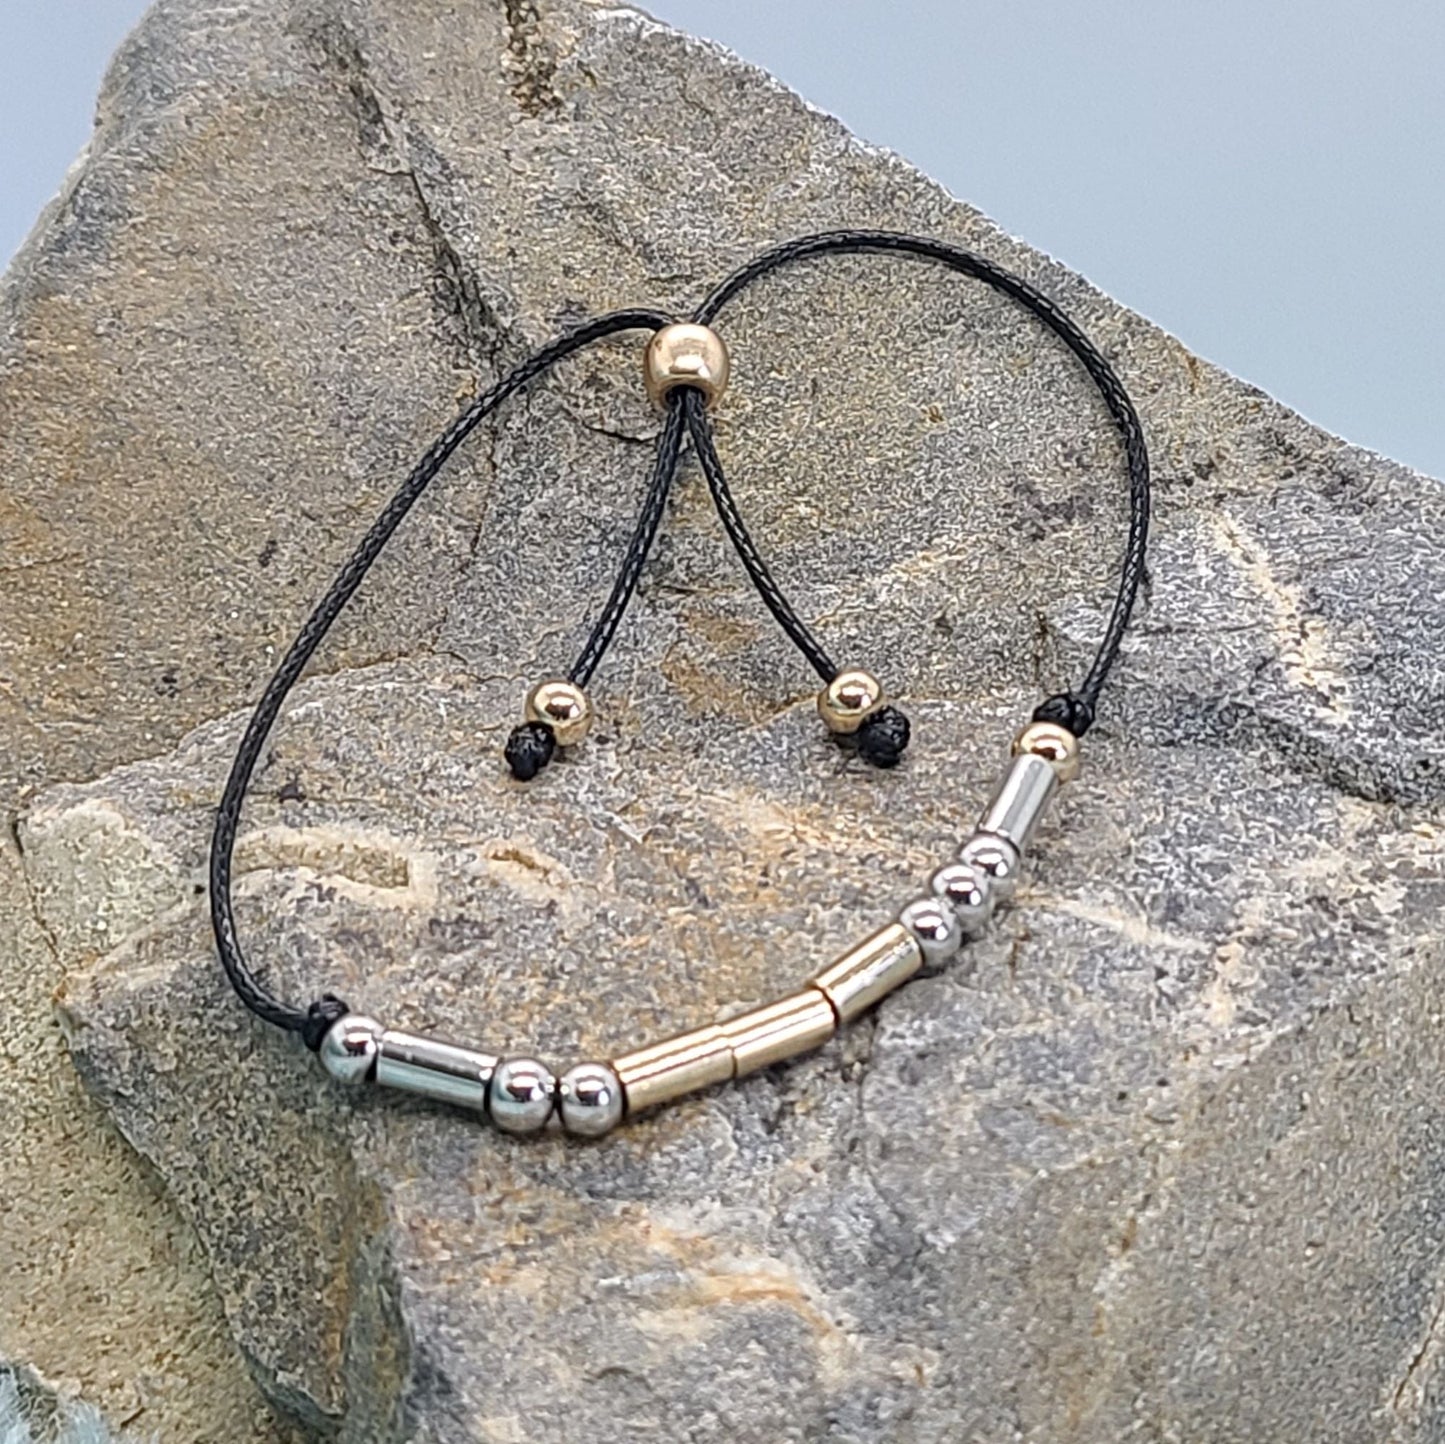 LOVE Morse Code Bracelet By Recovery Matters